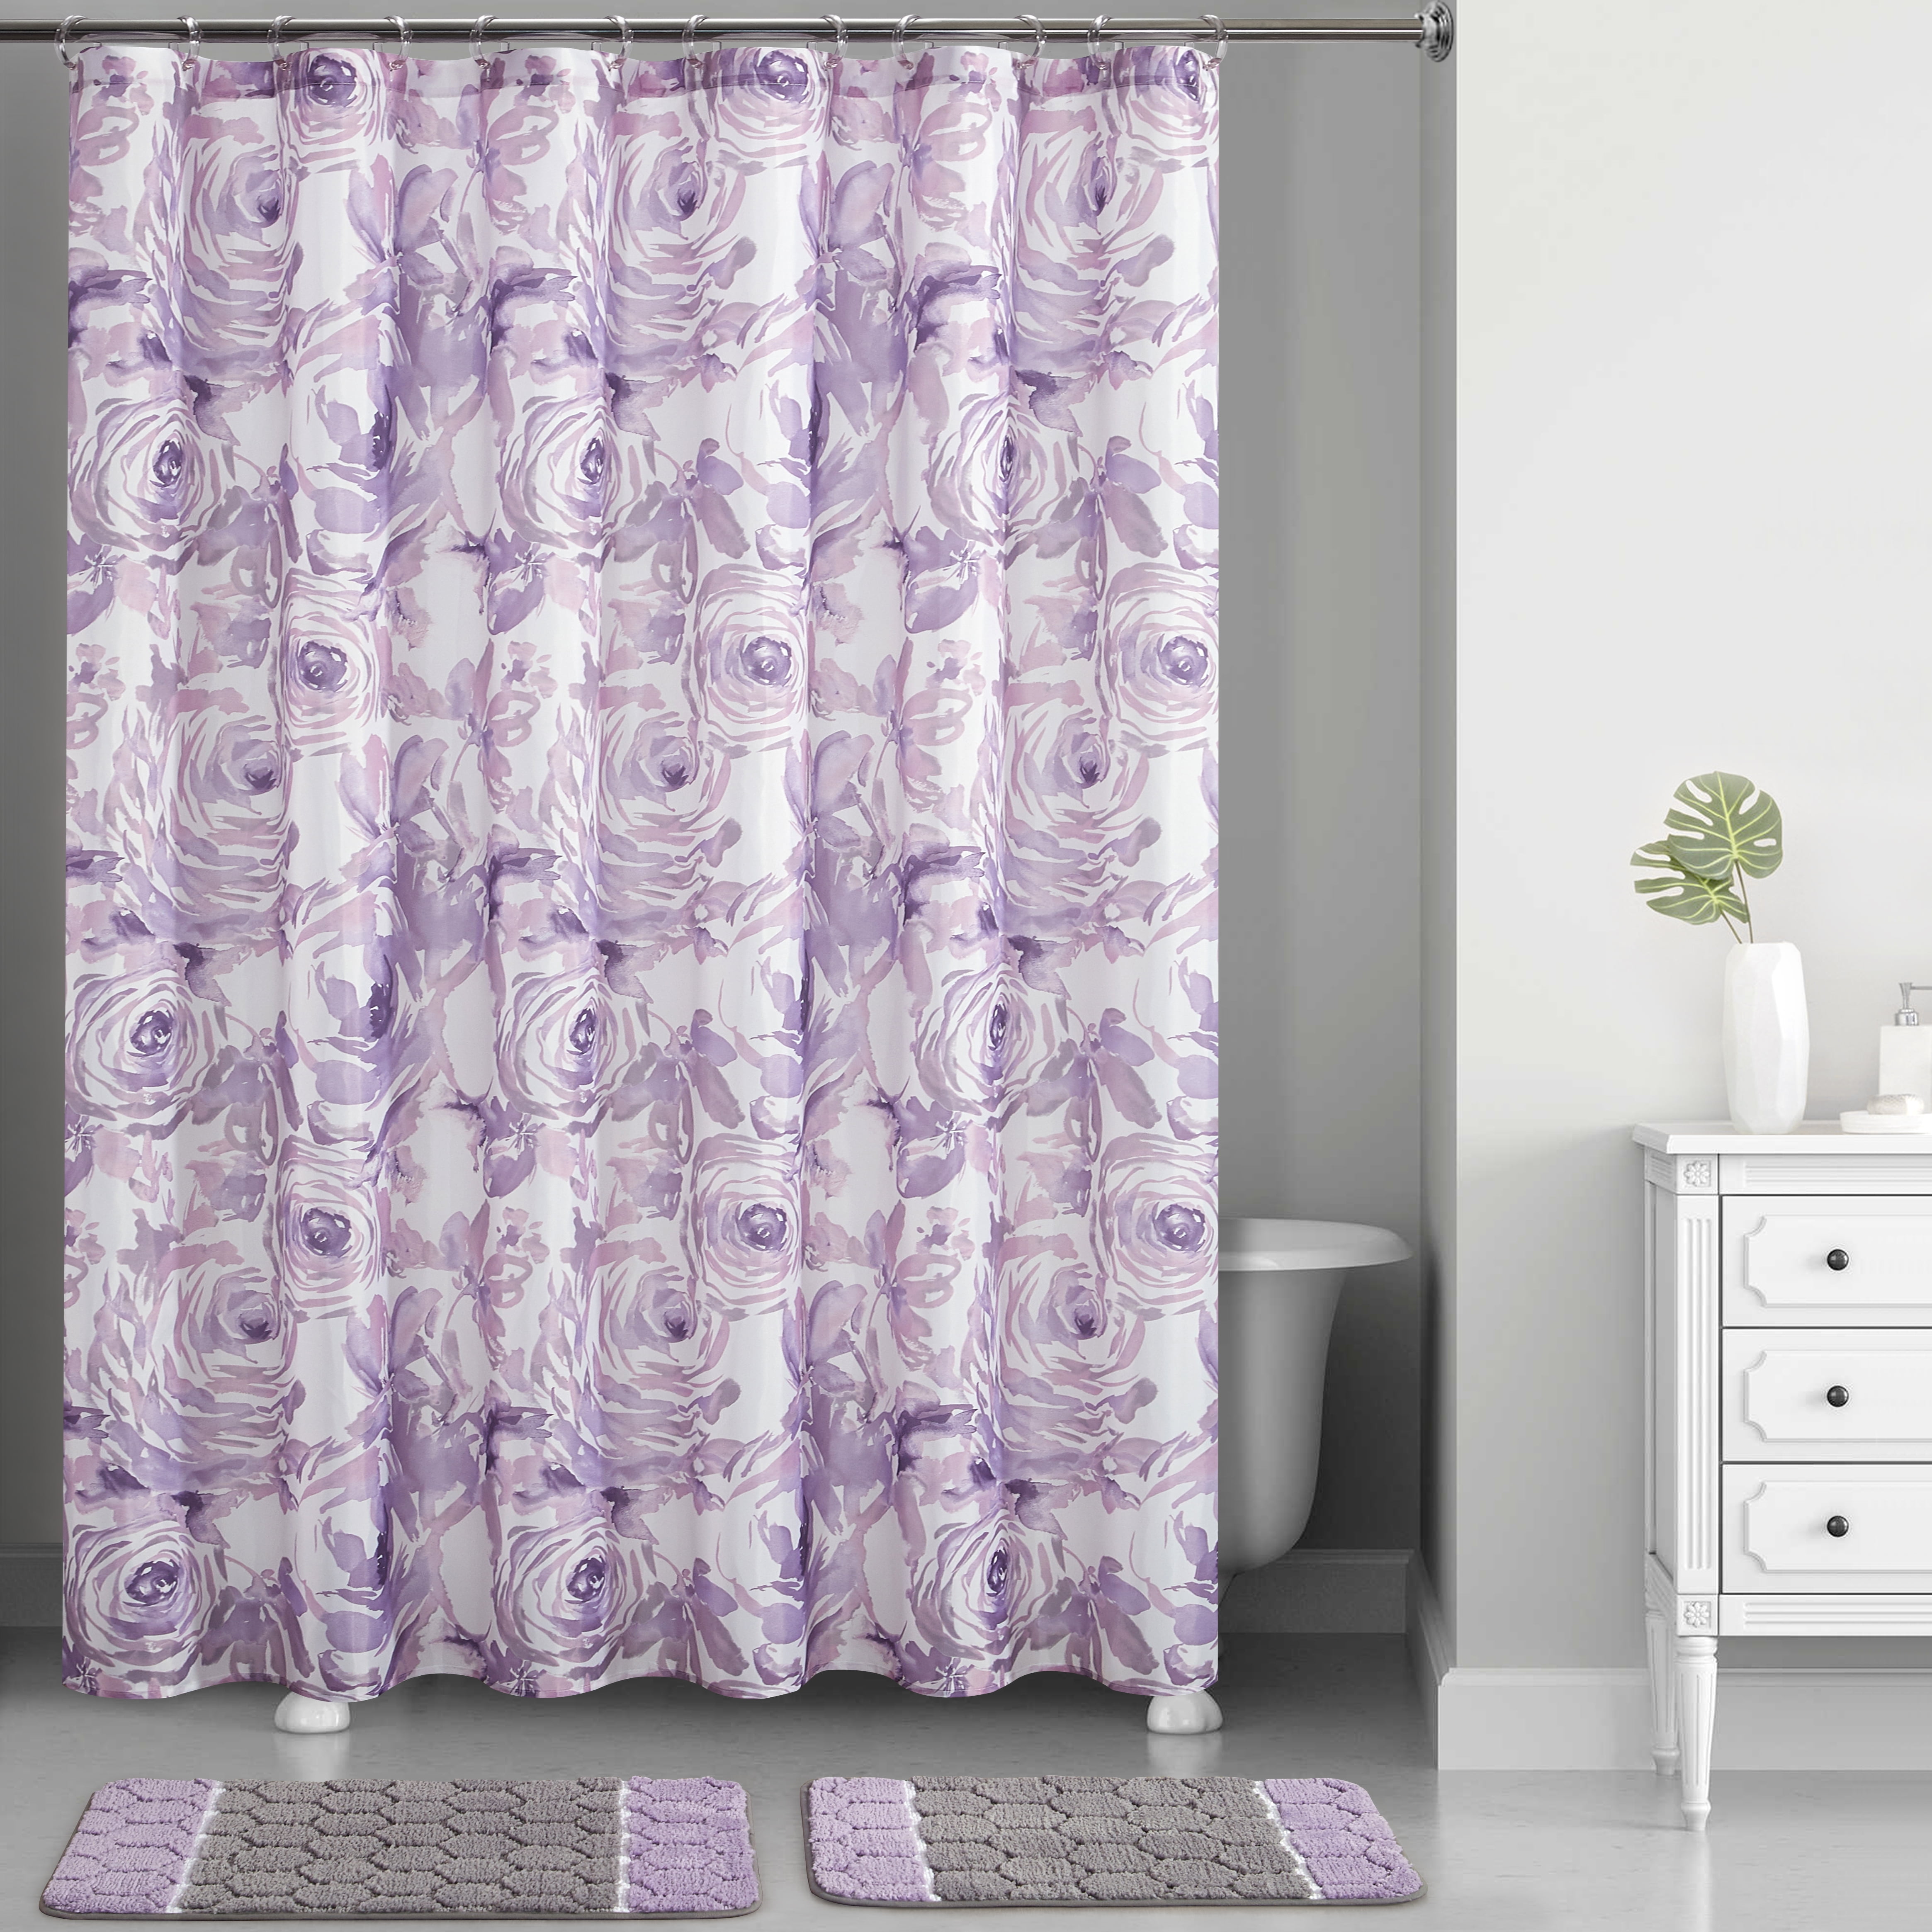 Mainstays Lavender Fl Watercolor, Primary Color Shower Curtain